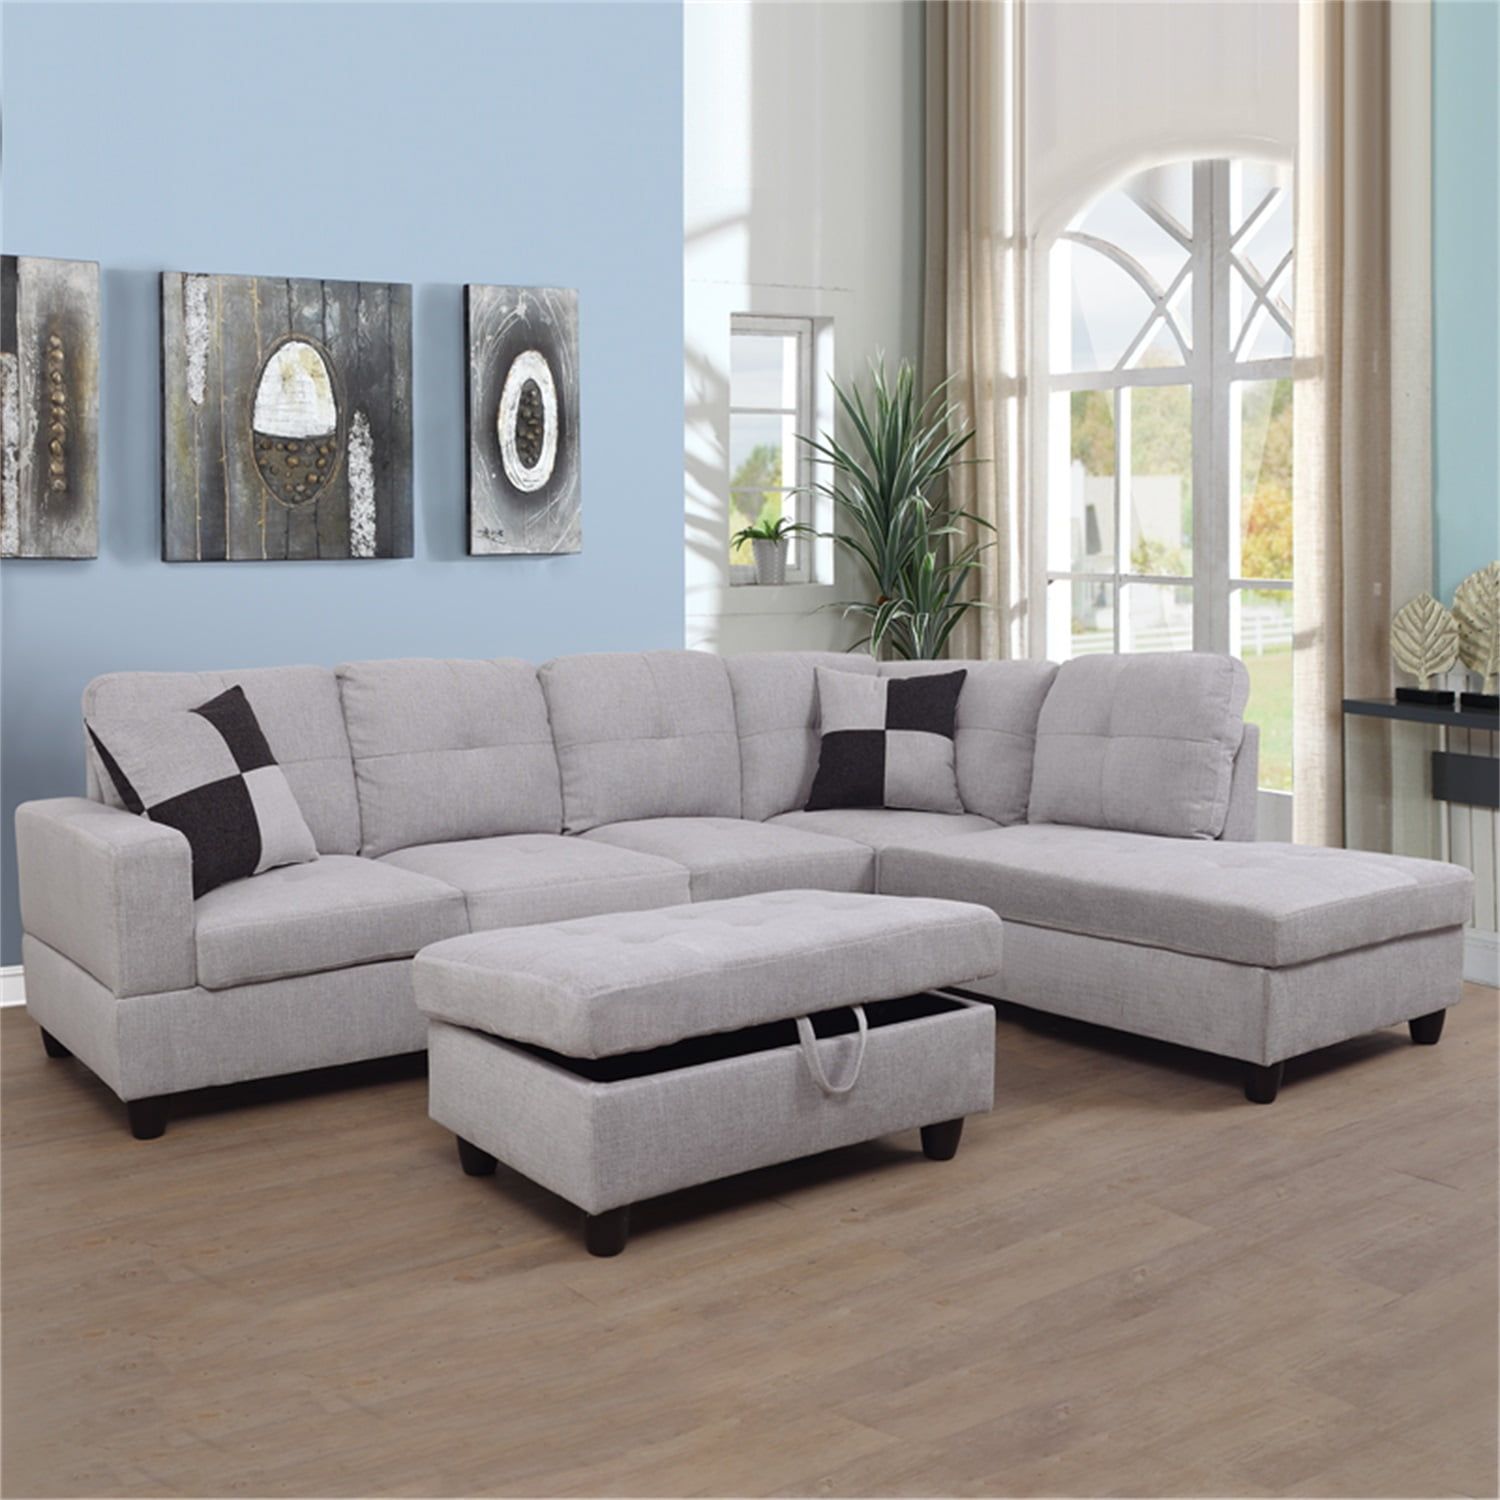 Hommoo Couch Sofa Set, Modern L Shaped Sofa For Living Room, Flannel Sectional  Sofa Set For Apartment, Off White(Without Ottoman) – Walmart Regarding Modern L Shaped Sofa Sectionals (Photo 1 of 15)